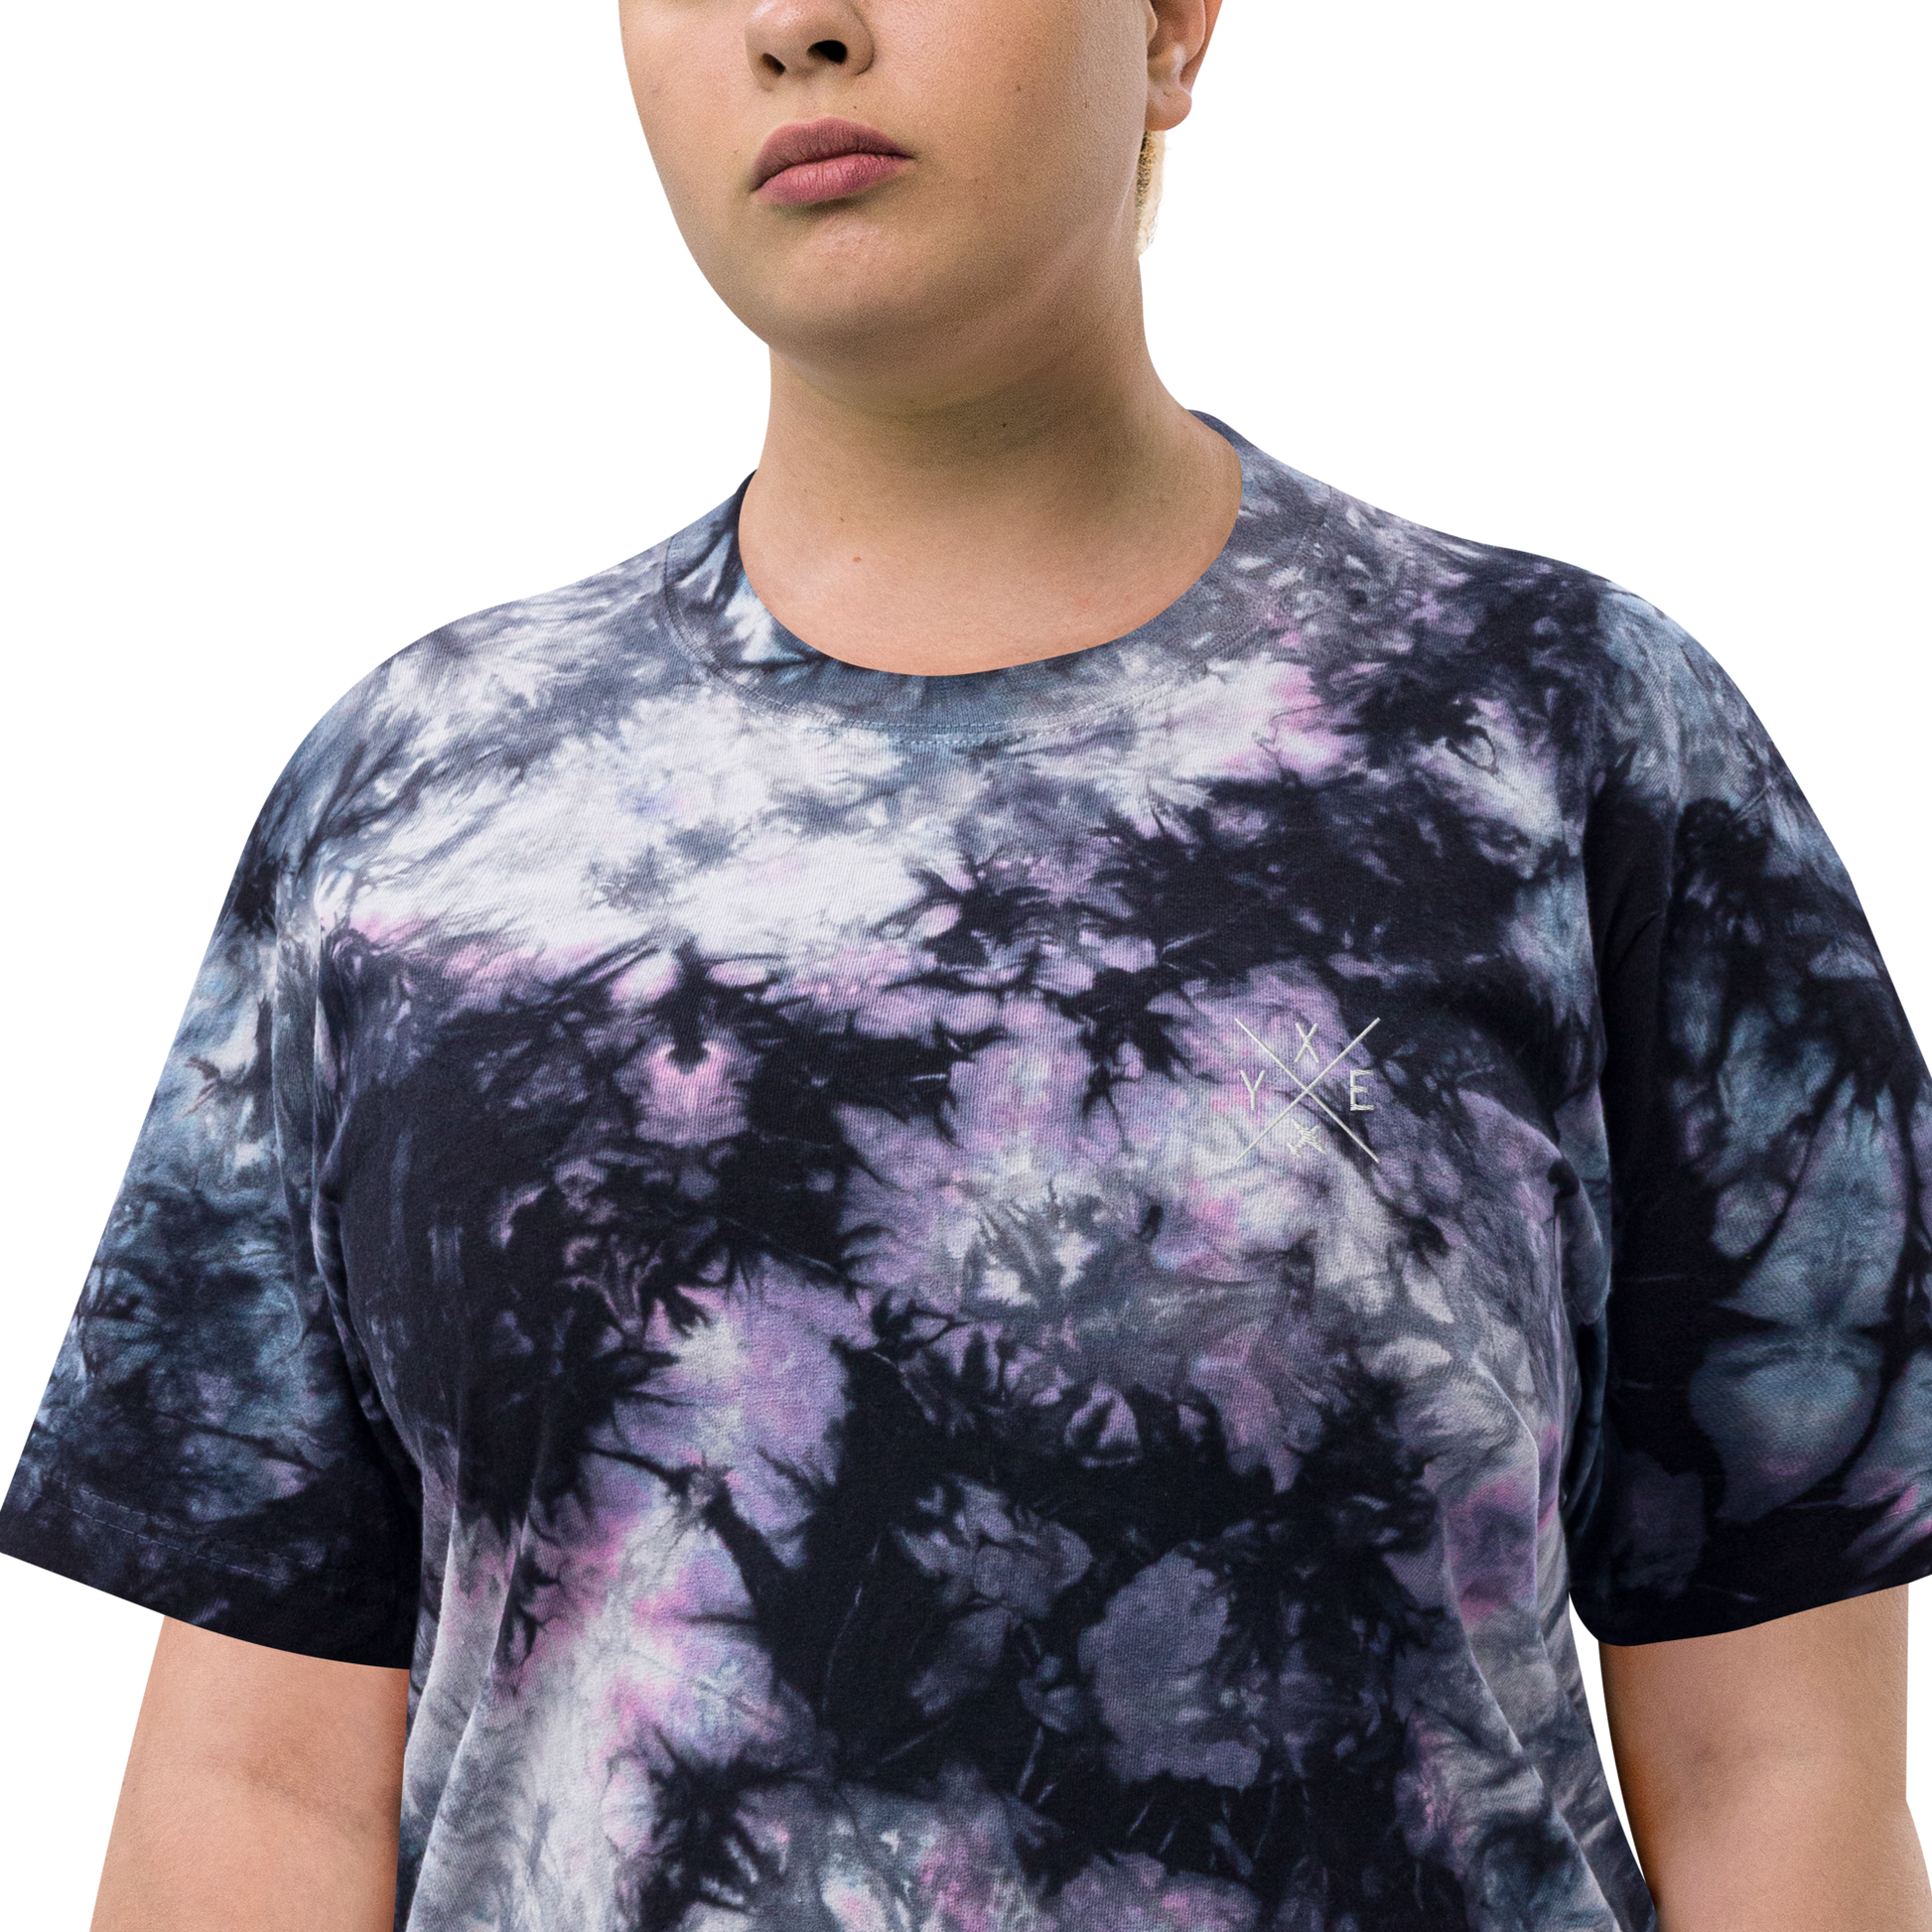 YHM Designs - YXE Saskatoon Oversized Tie-Dye T-Shirt - Crossed-X Design with Airport Code and Vintage Propliner - White Embroidery - Image 07